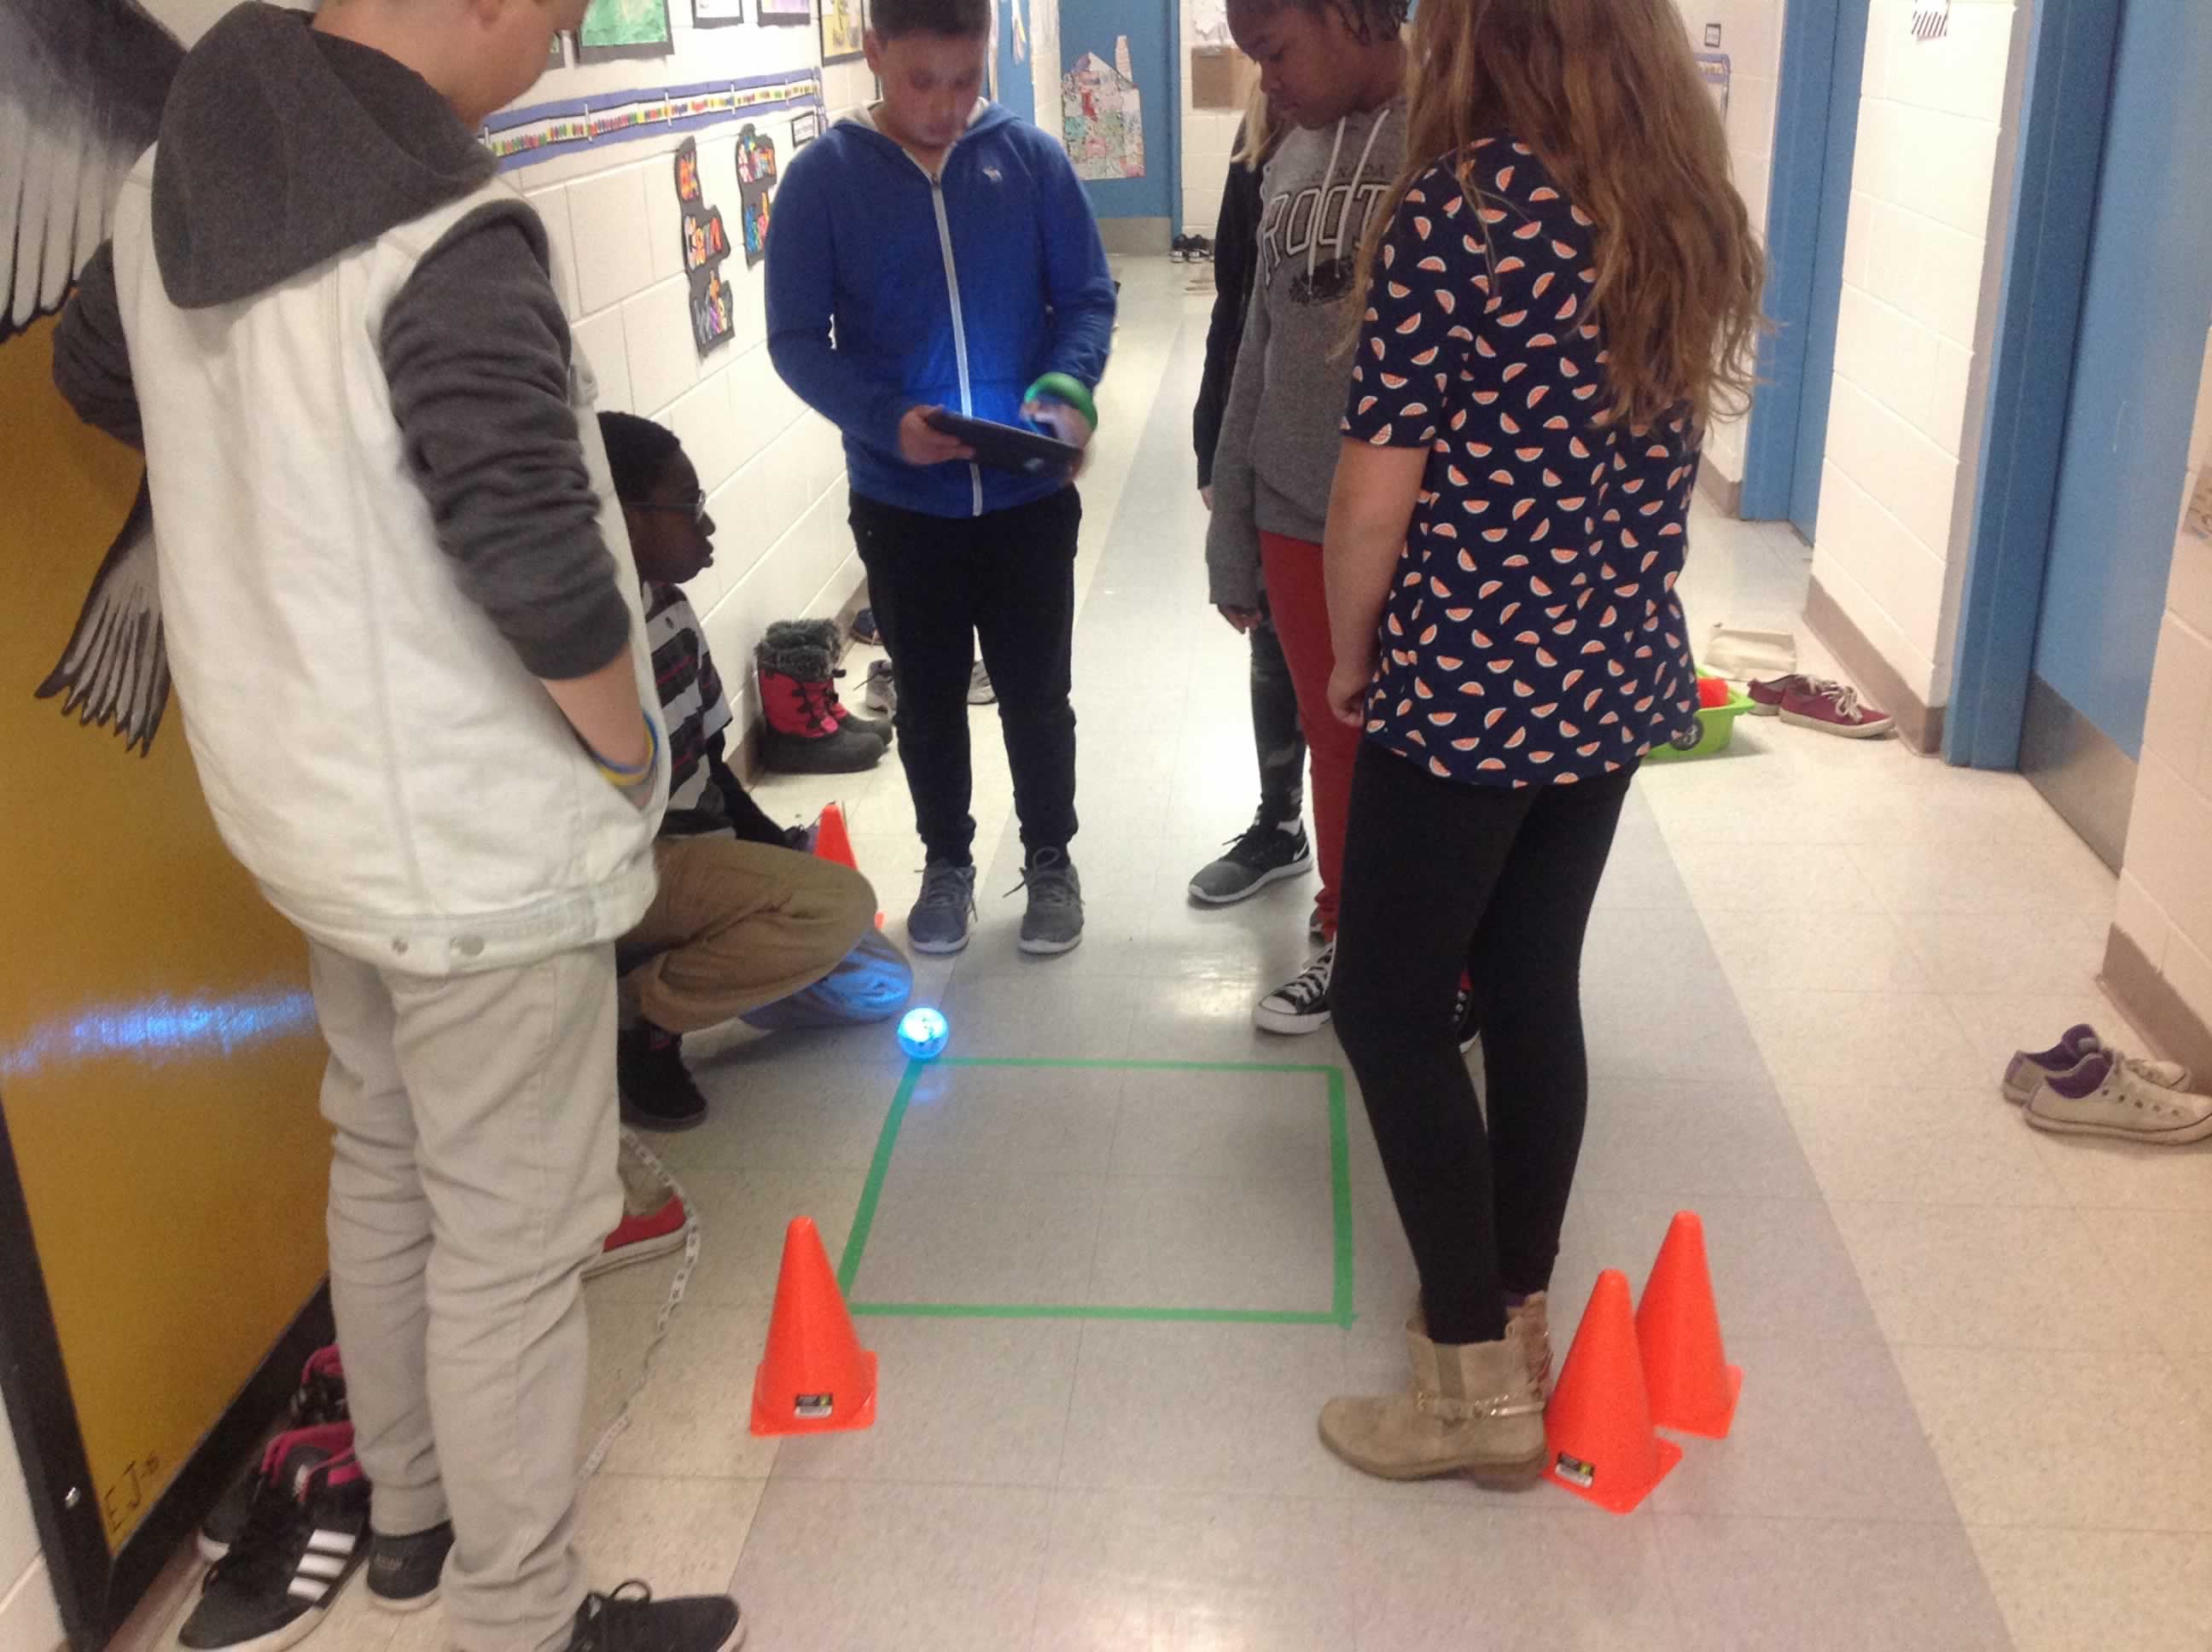 students in hall measuring angles using robot